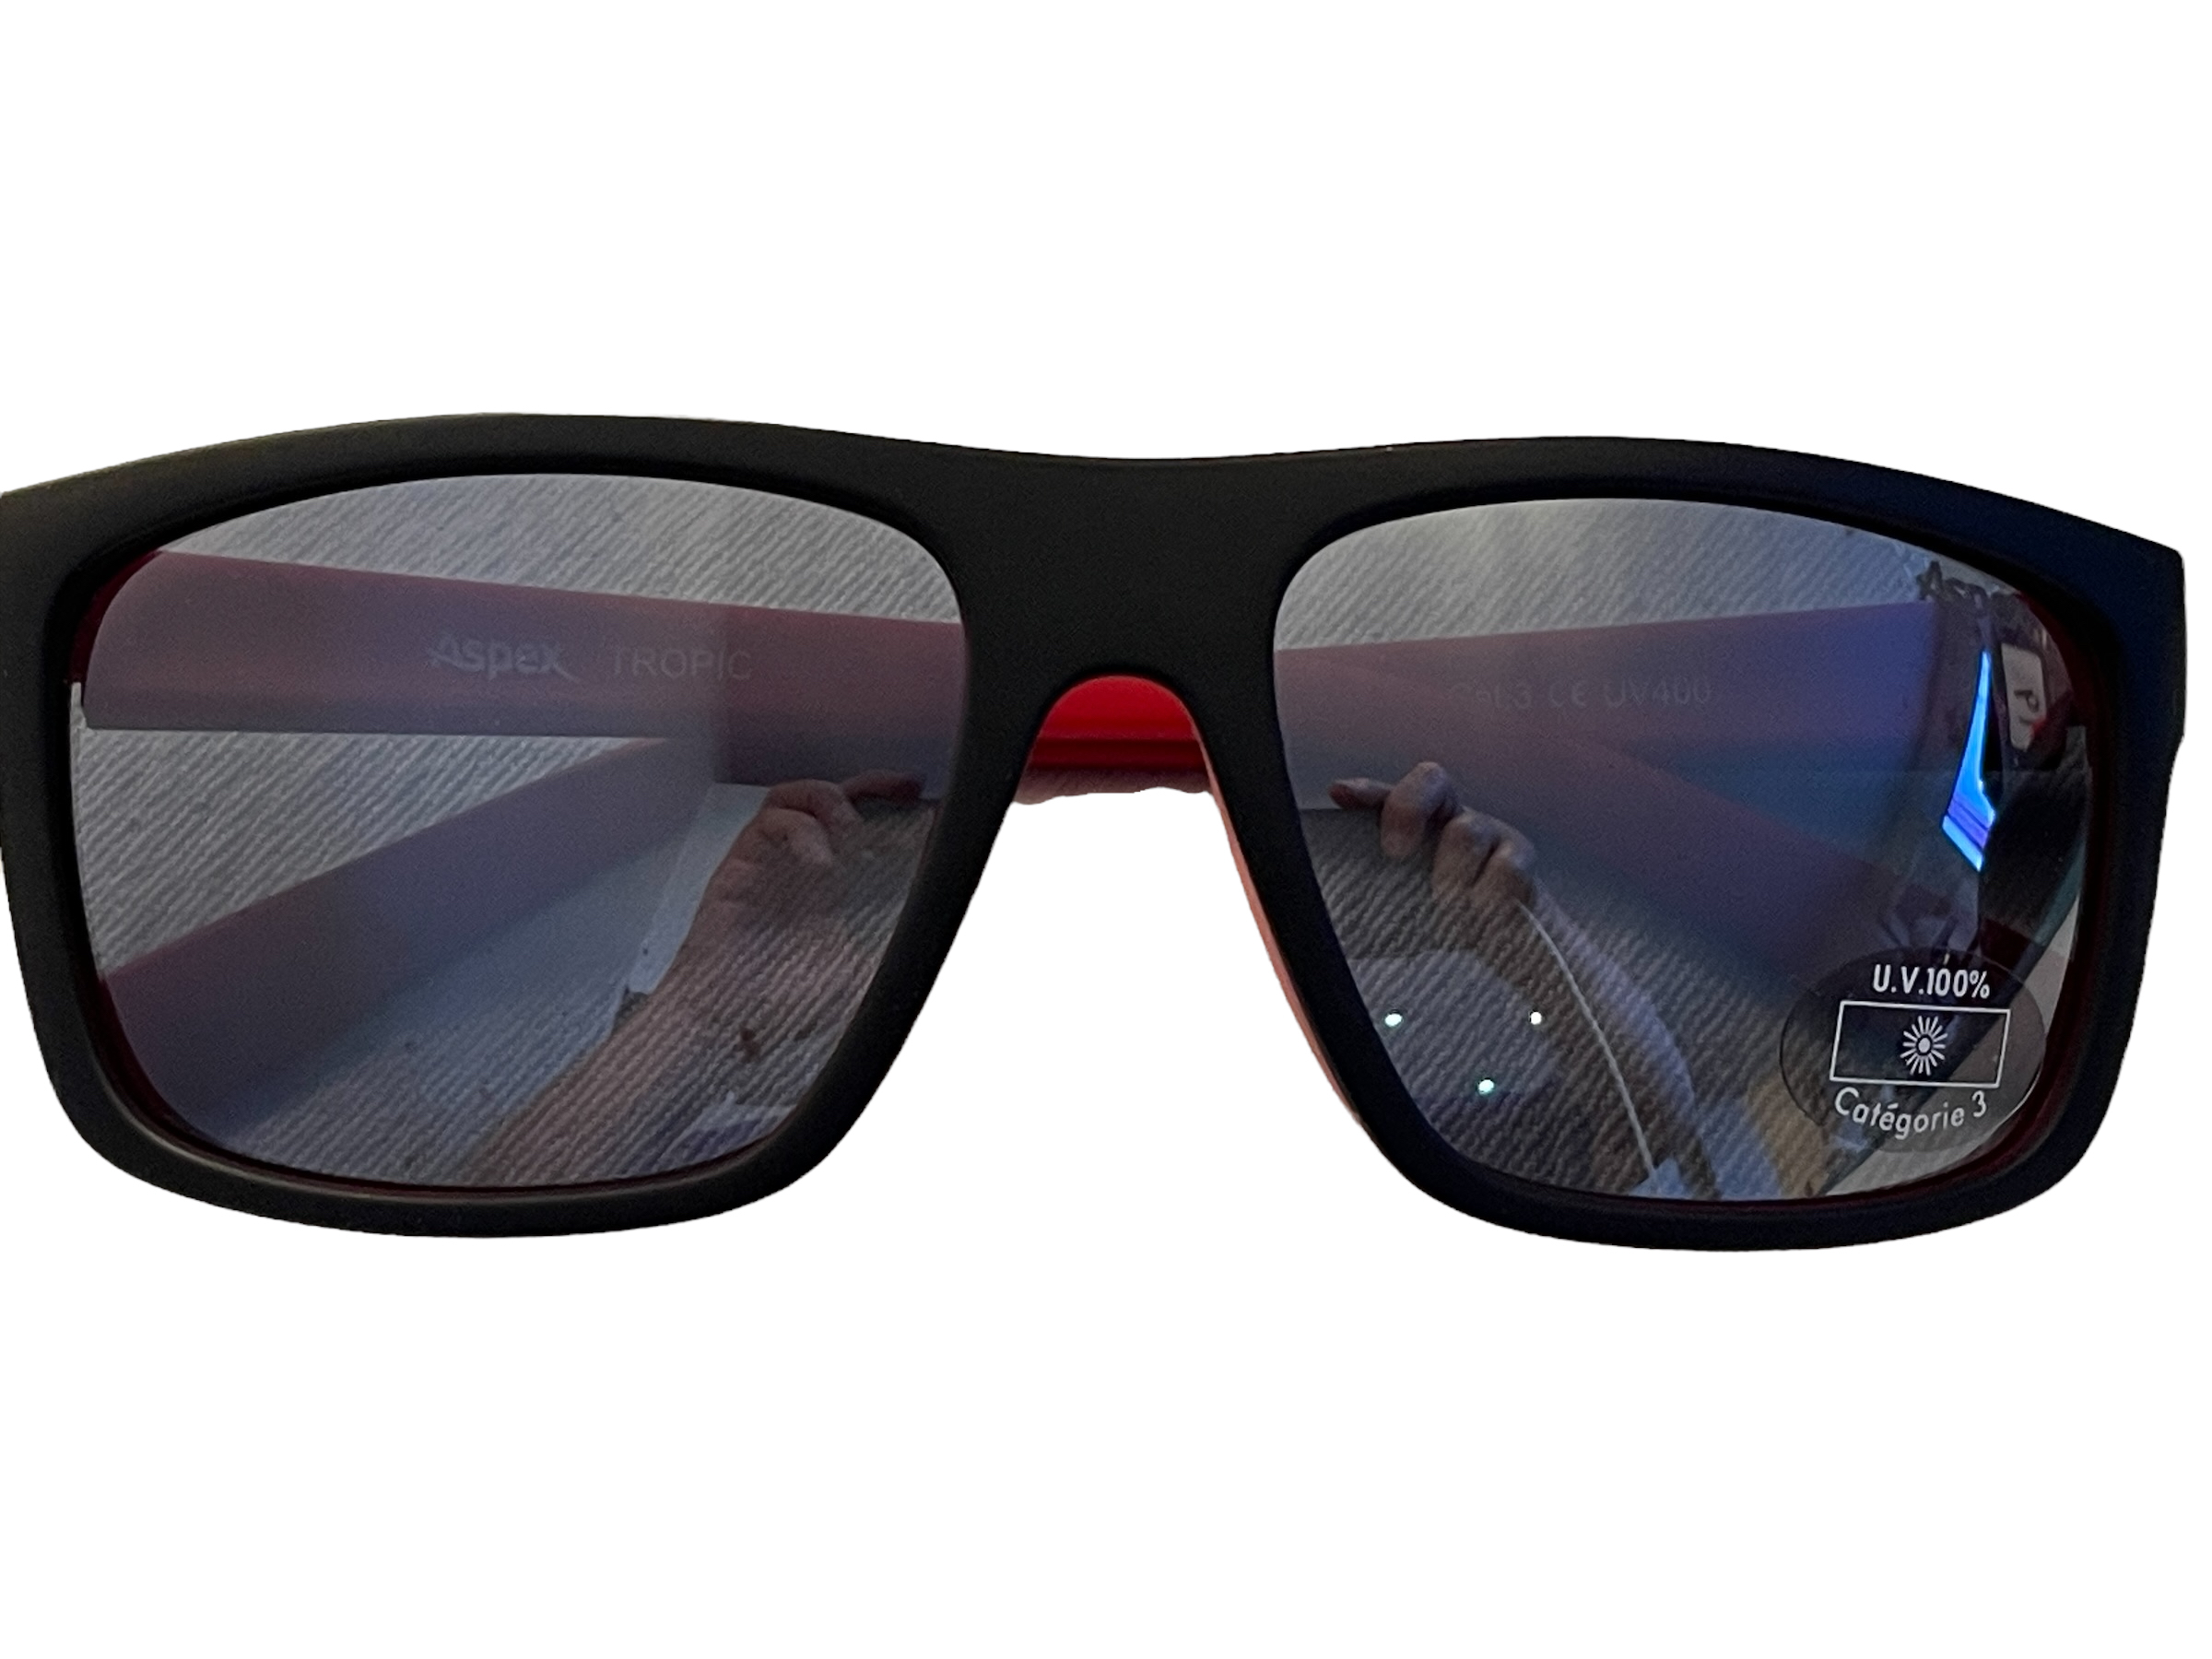 Aspex Tropic Sunglasses from Our Private Jet Charter Ex Demo or Surplus Stock - Image 3 of 4